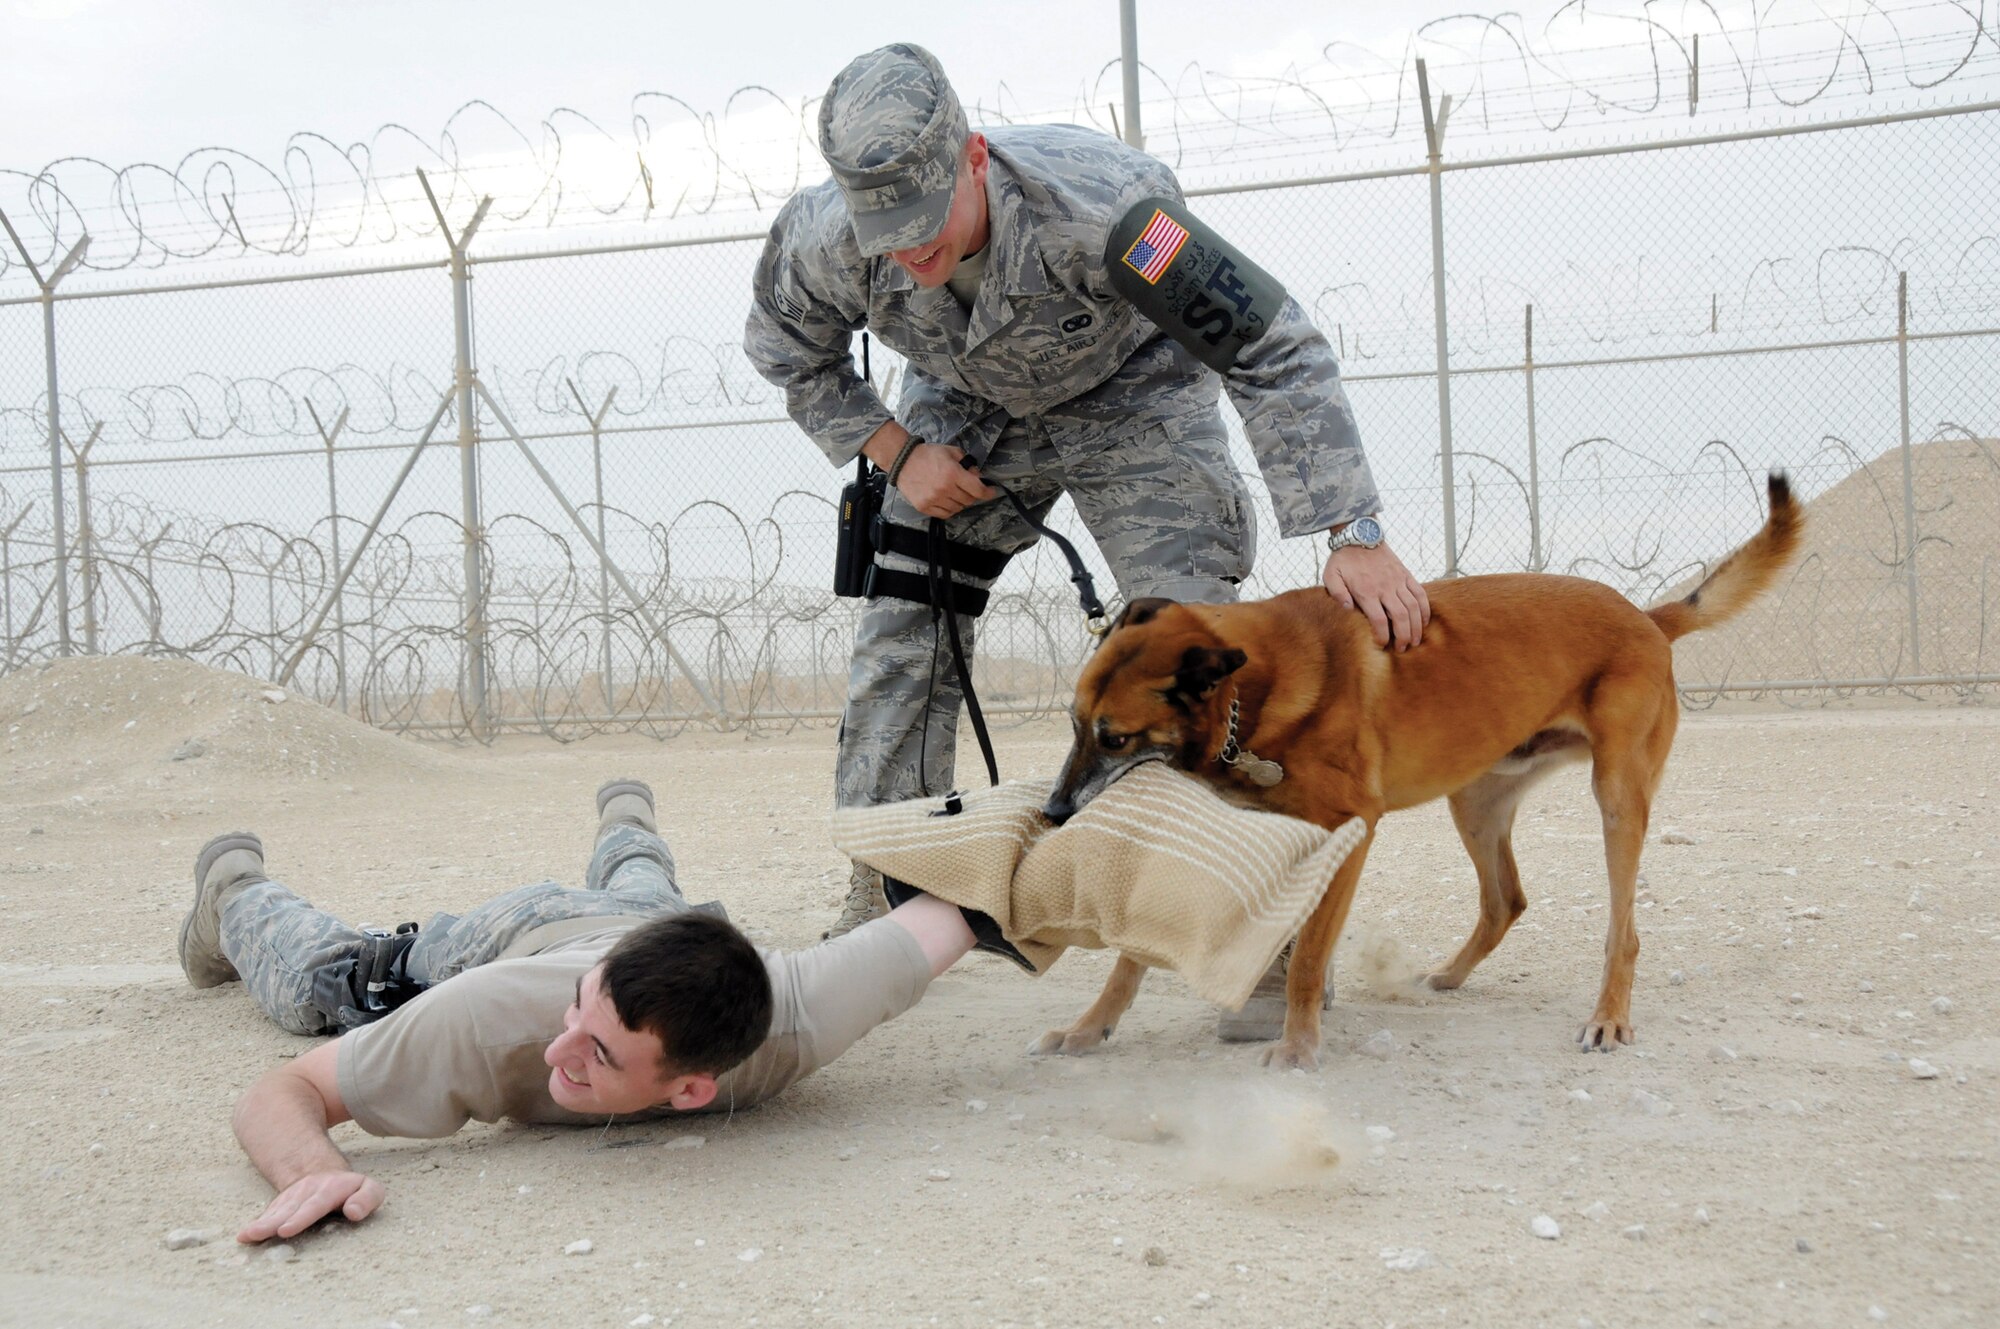 Lenox, a Belgian Malinous, brings Staff Sgt. Logan Ray, military working dog handler assigned to the 379th Expeditionary Security Forces Squadron, to the ground as his handler, Staff Sgt. Edward Lawlor, 379 ESFS military working dog handler, comes to his side to take control of the ?suspect? during training at an undisclosed location in Southwest Asia Nov. 4. These 379 ESFS dog handlers provide the first line of defense for the base by detecting explosives and weapons. Sergeant Ray, a native of Bethesda, Md., and Sergeant Lawlor, a native of Wolcott, Conn., both are deployed from Andrews Air Force Base, Md. (U.S. Air Force photo by Staff Sgt. Darnell T. Cannady)